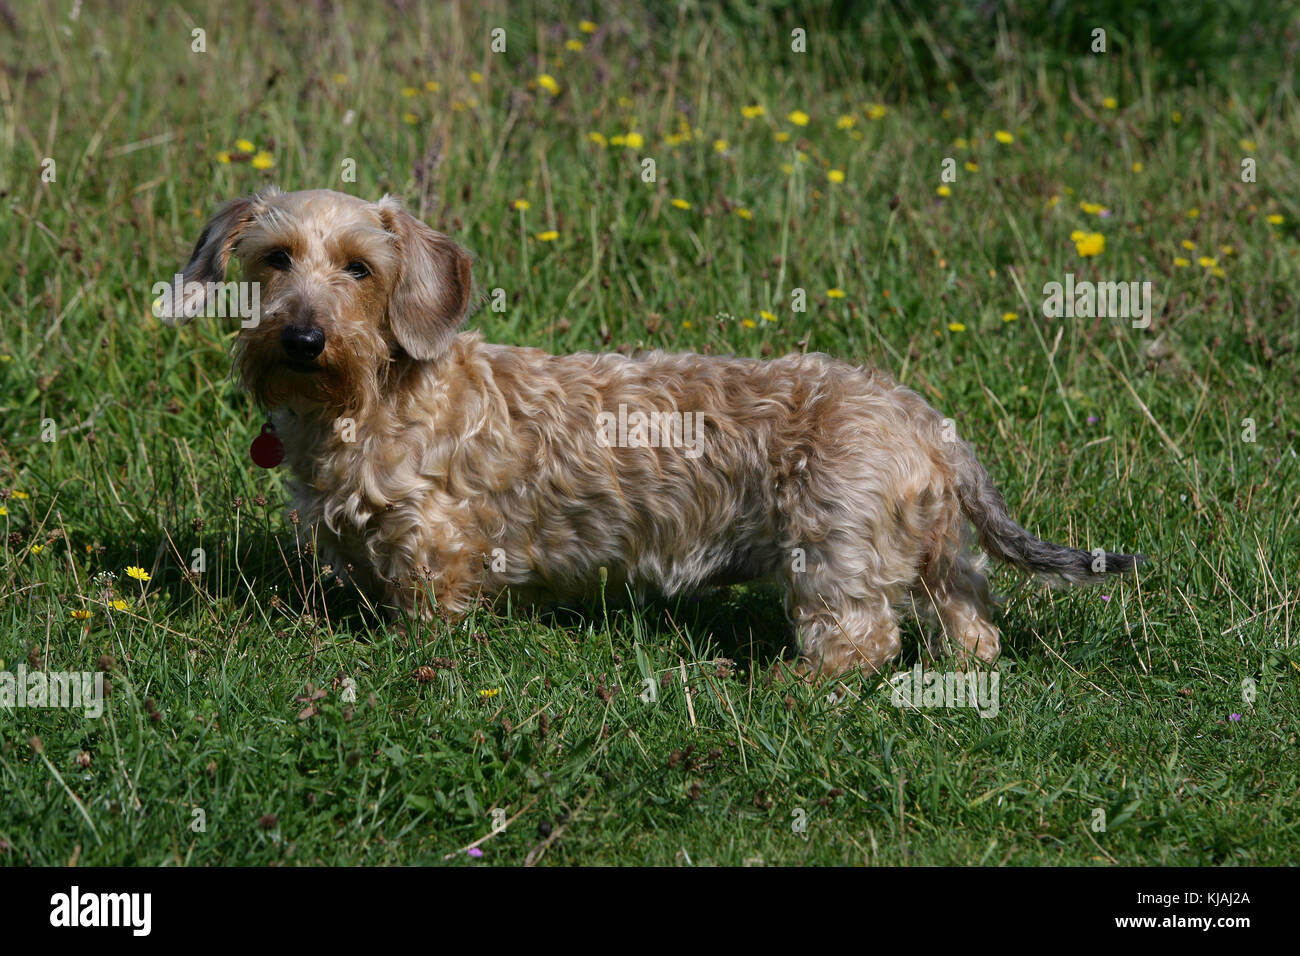 Wire-haired Miniature Dachshund dog standing in grass looking at the camera Stock Photo